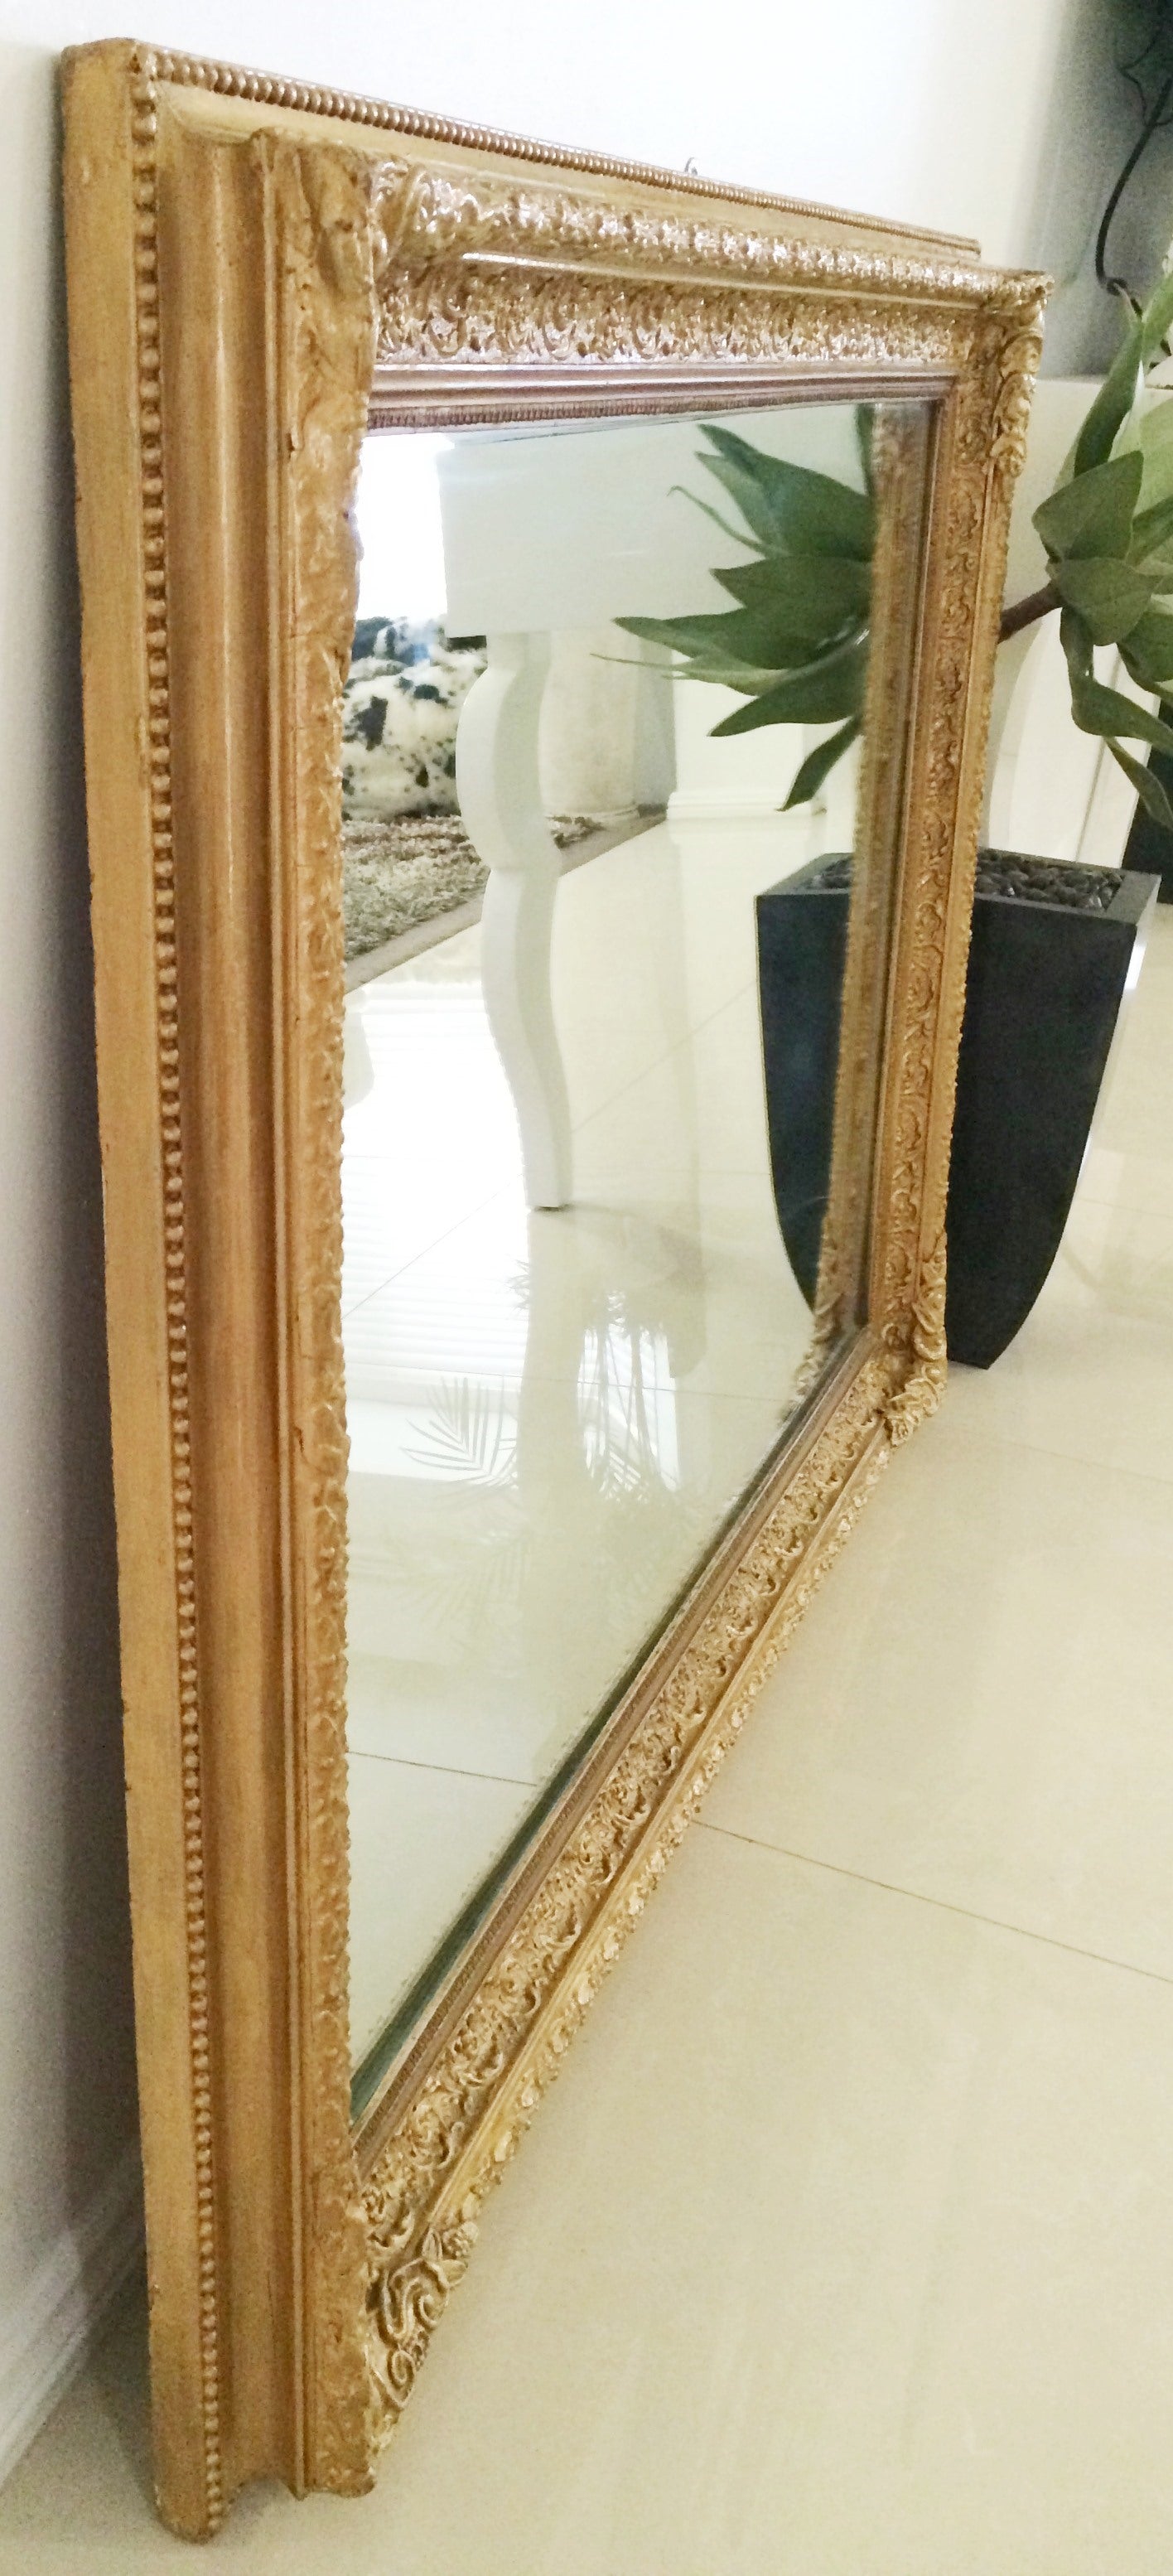 HUGE Vintage Ornate Gold Wall Mirror | eXibit collection